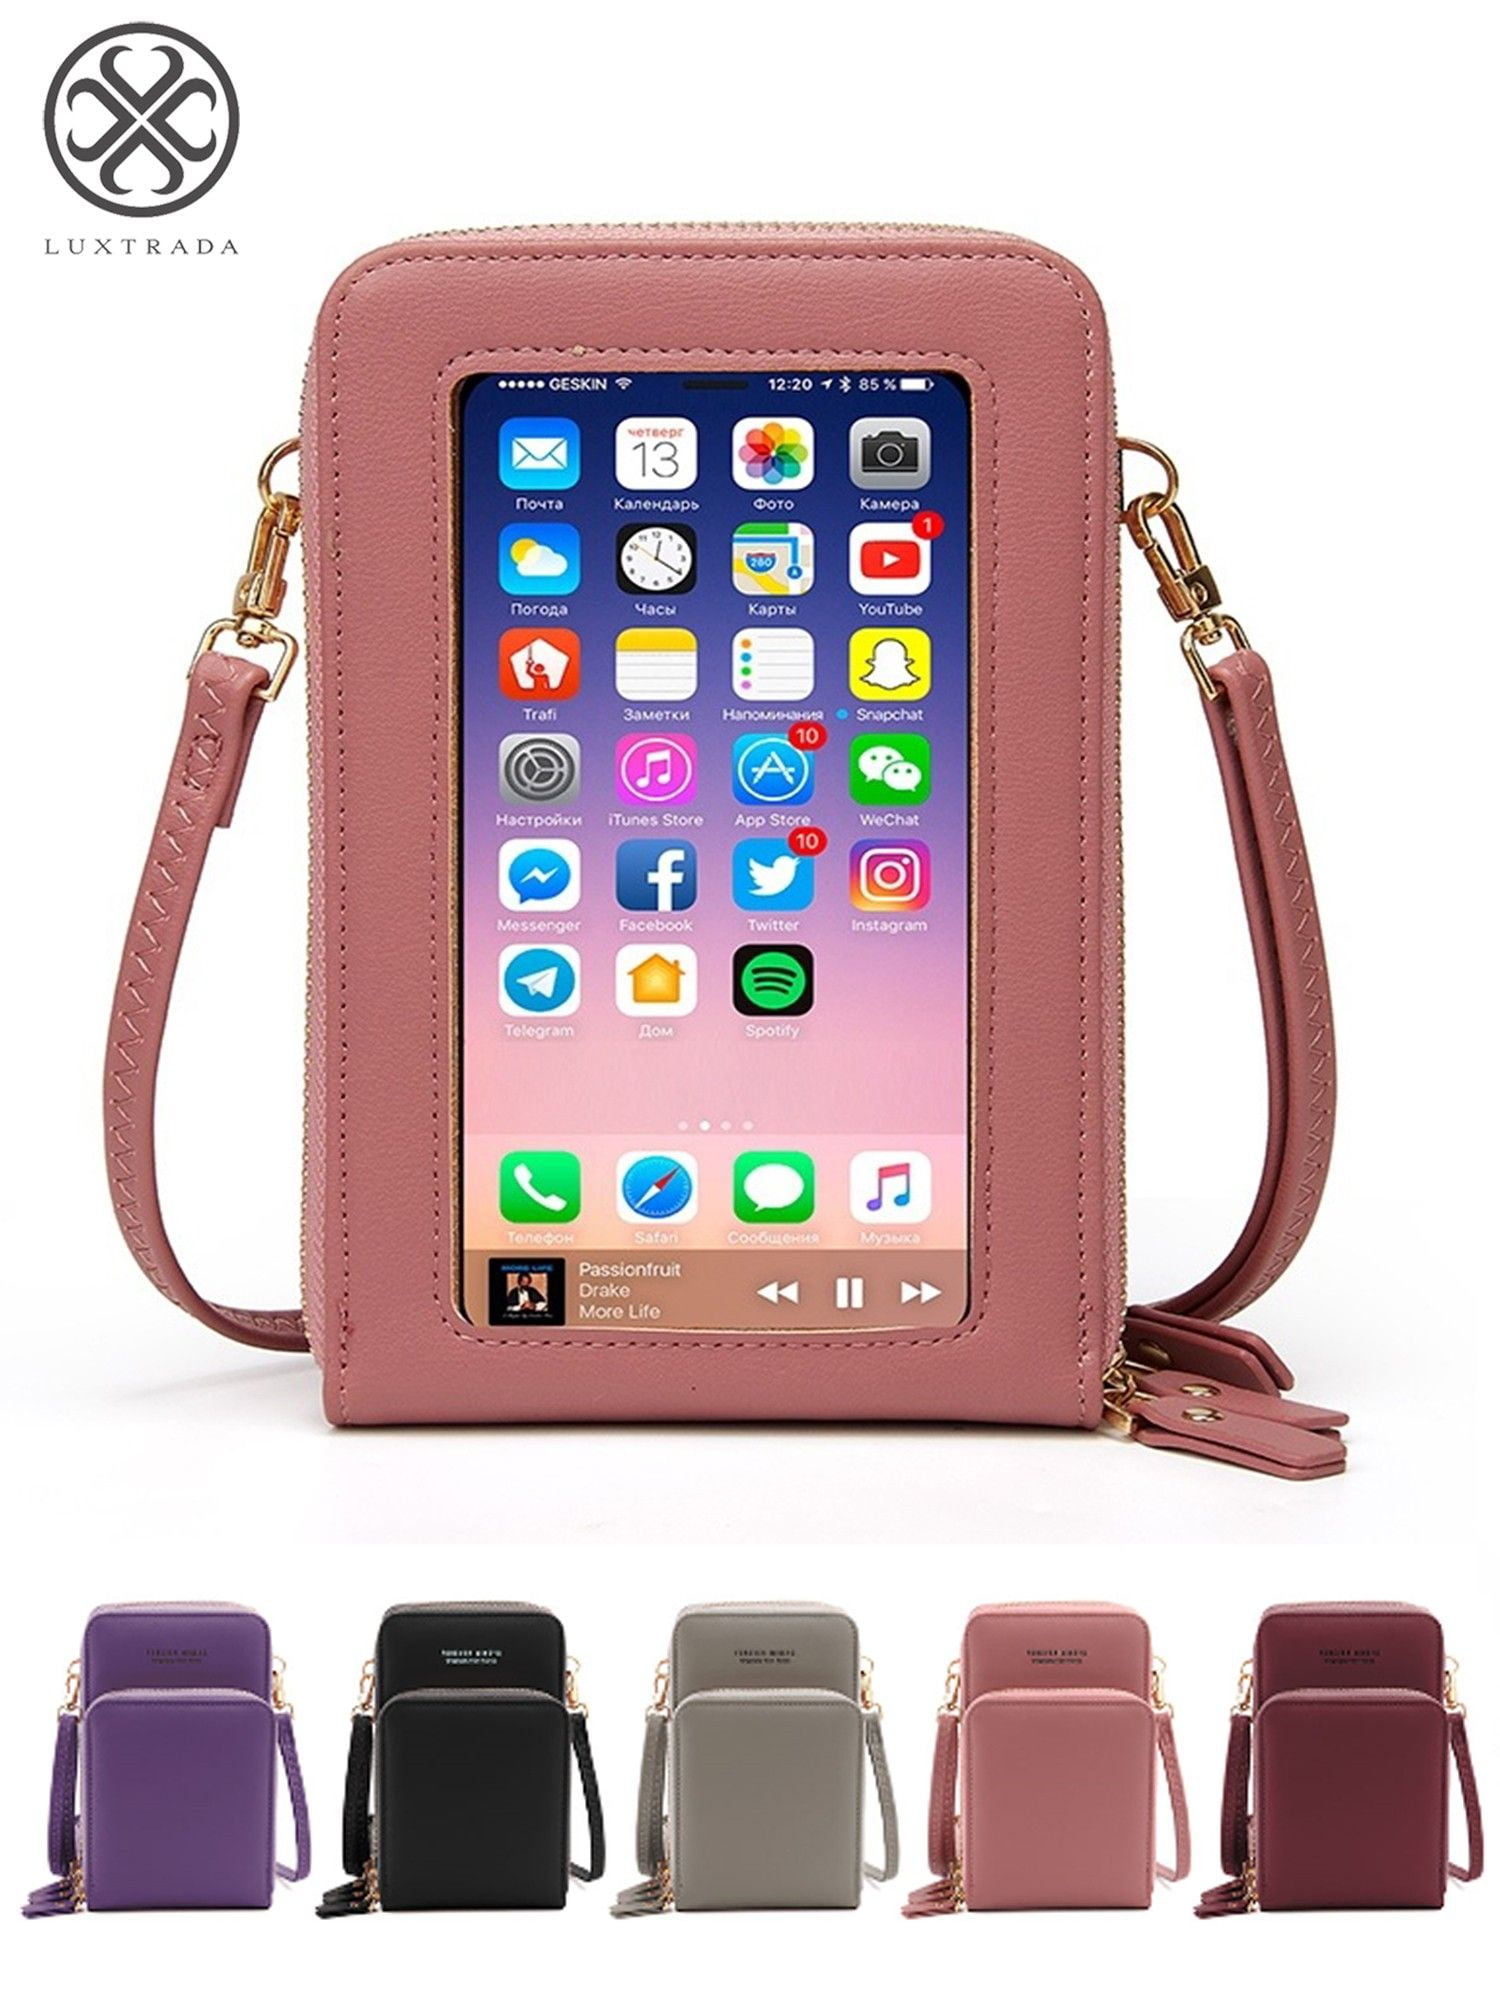 Luxtrada Women Cell Phone Purse Bag Shoulder Strap Touch Screen Cross Body Pouch Wallet Pink 04cad3e9 15c4 454d b9fa b3d2df2783db.bc57ddcab8ba6dd2129a44df1308f007